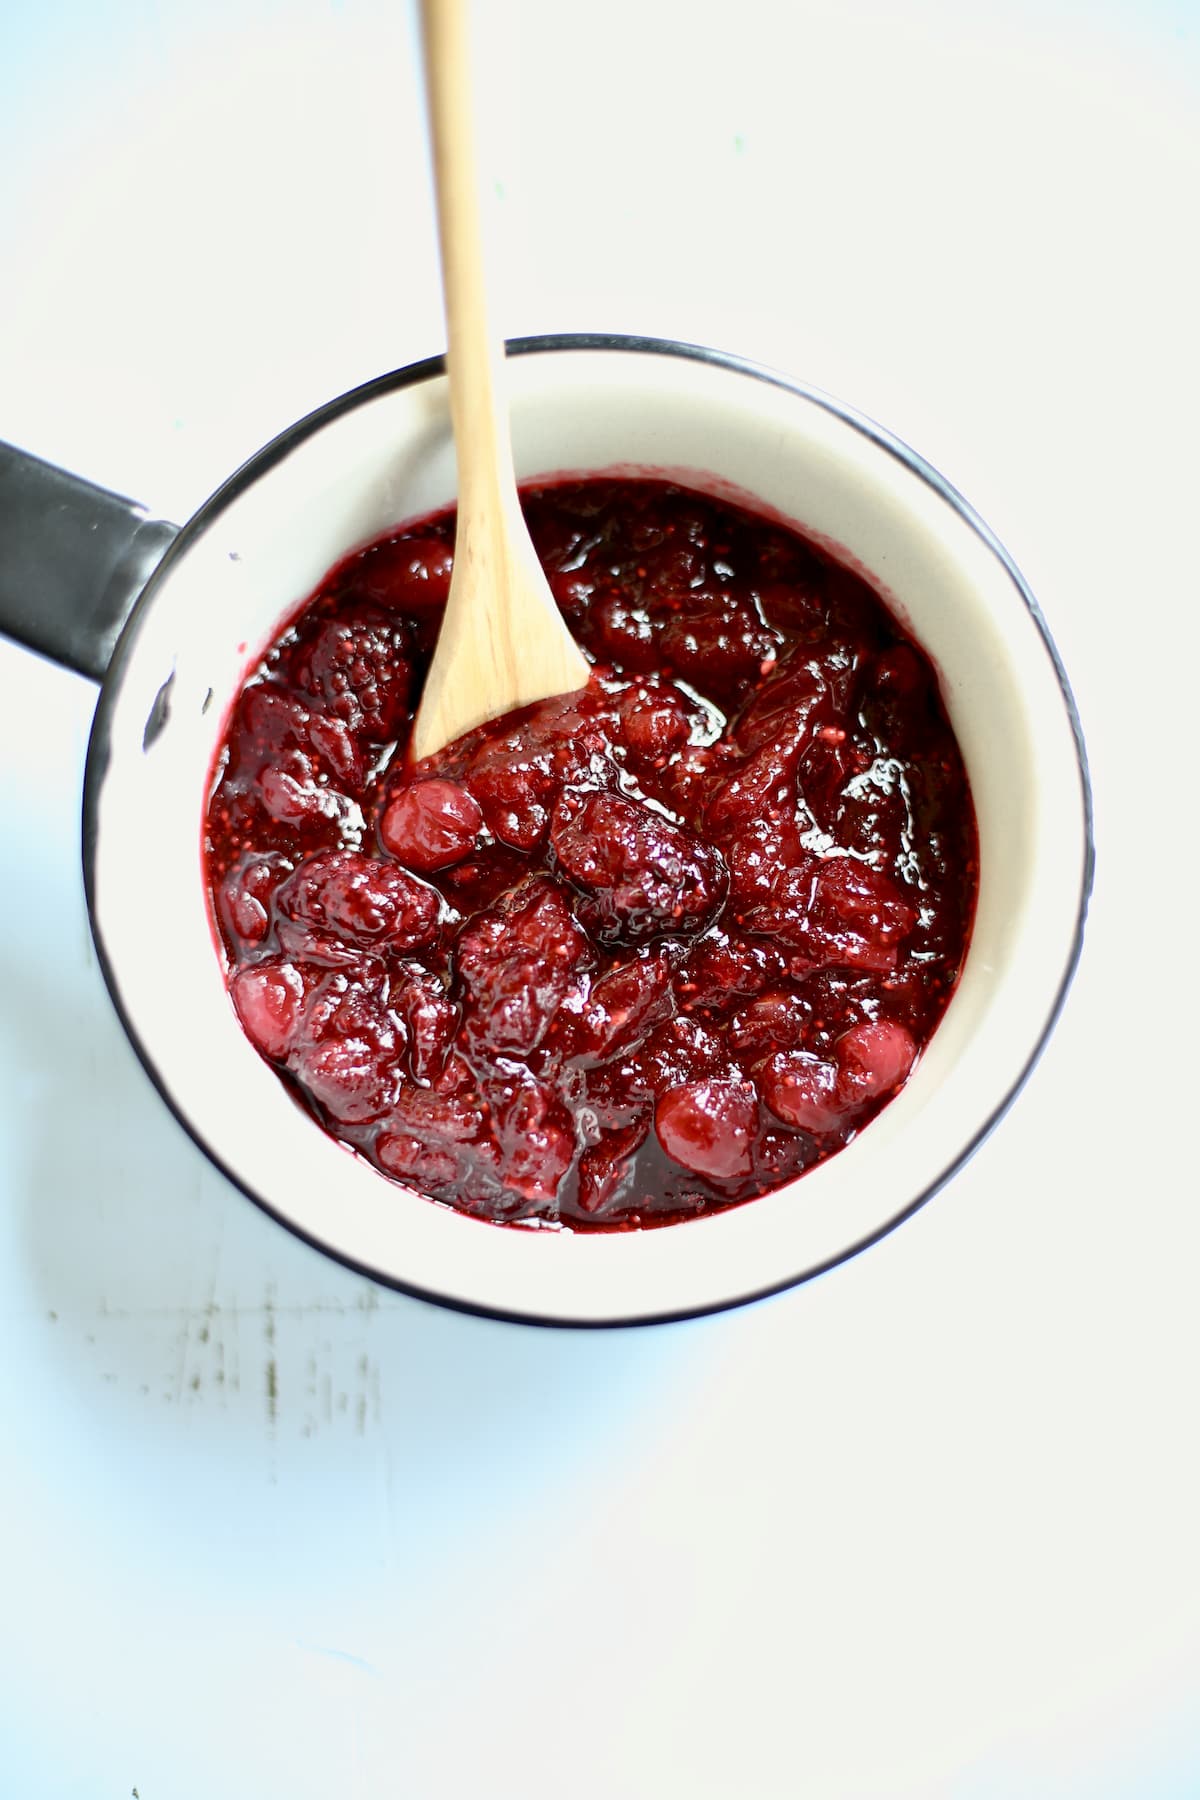 a white saucepan of made cranberry sauce on a blue table